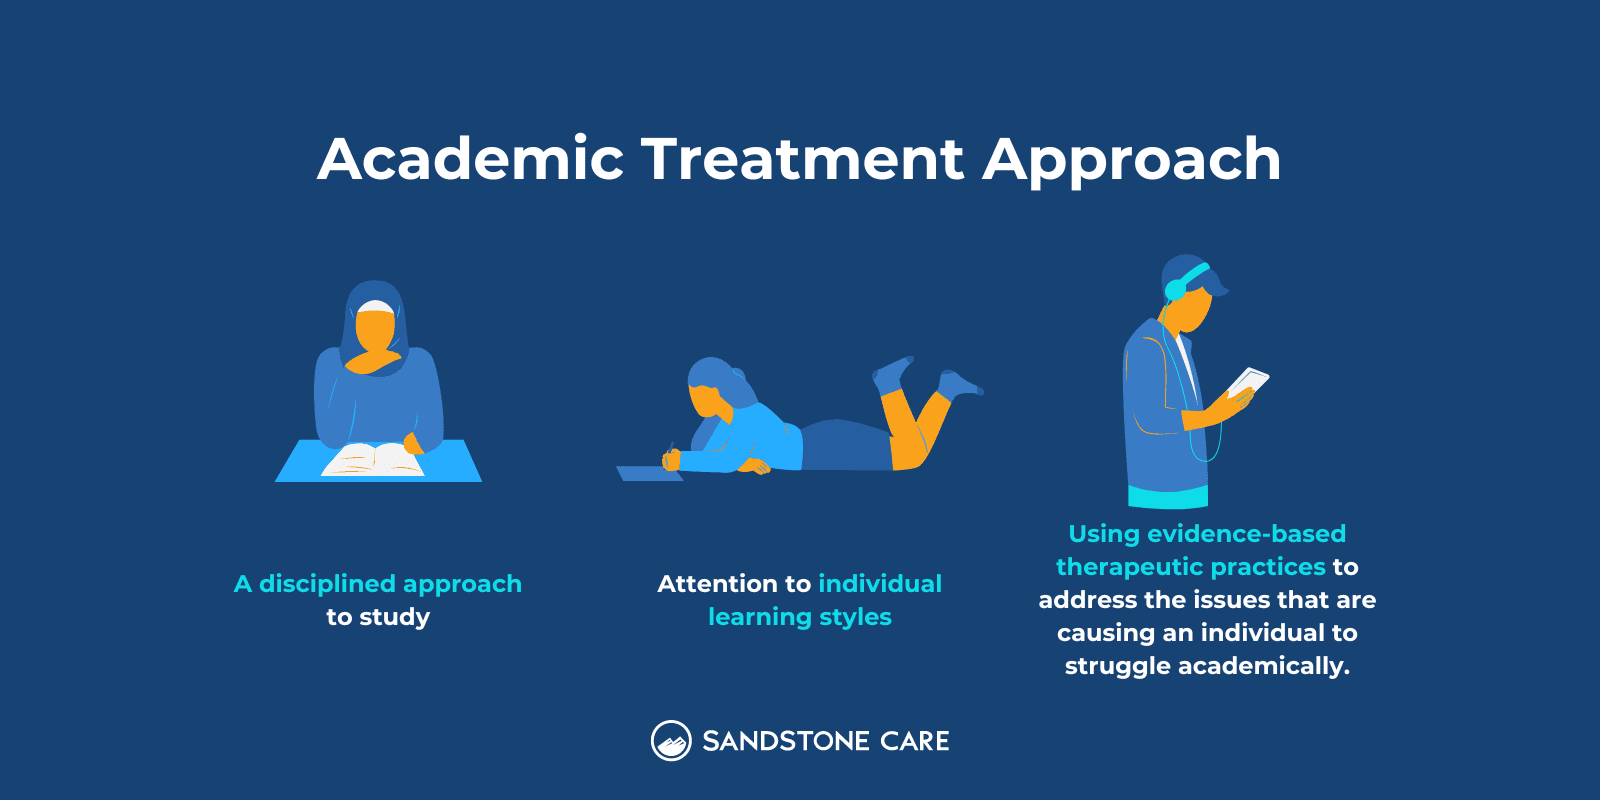 Sandstone's Academic Treatment Approach infographic with relevant icons